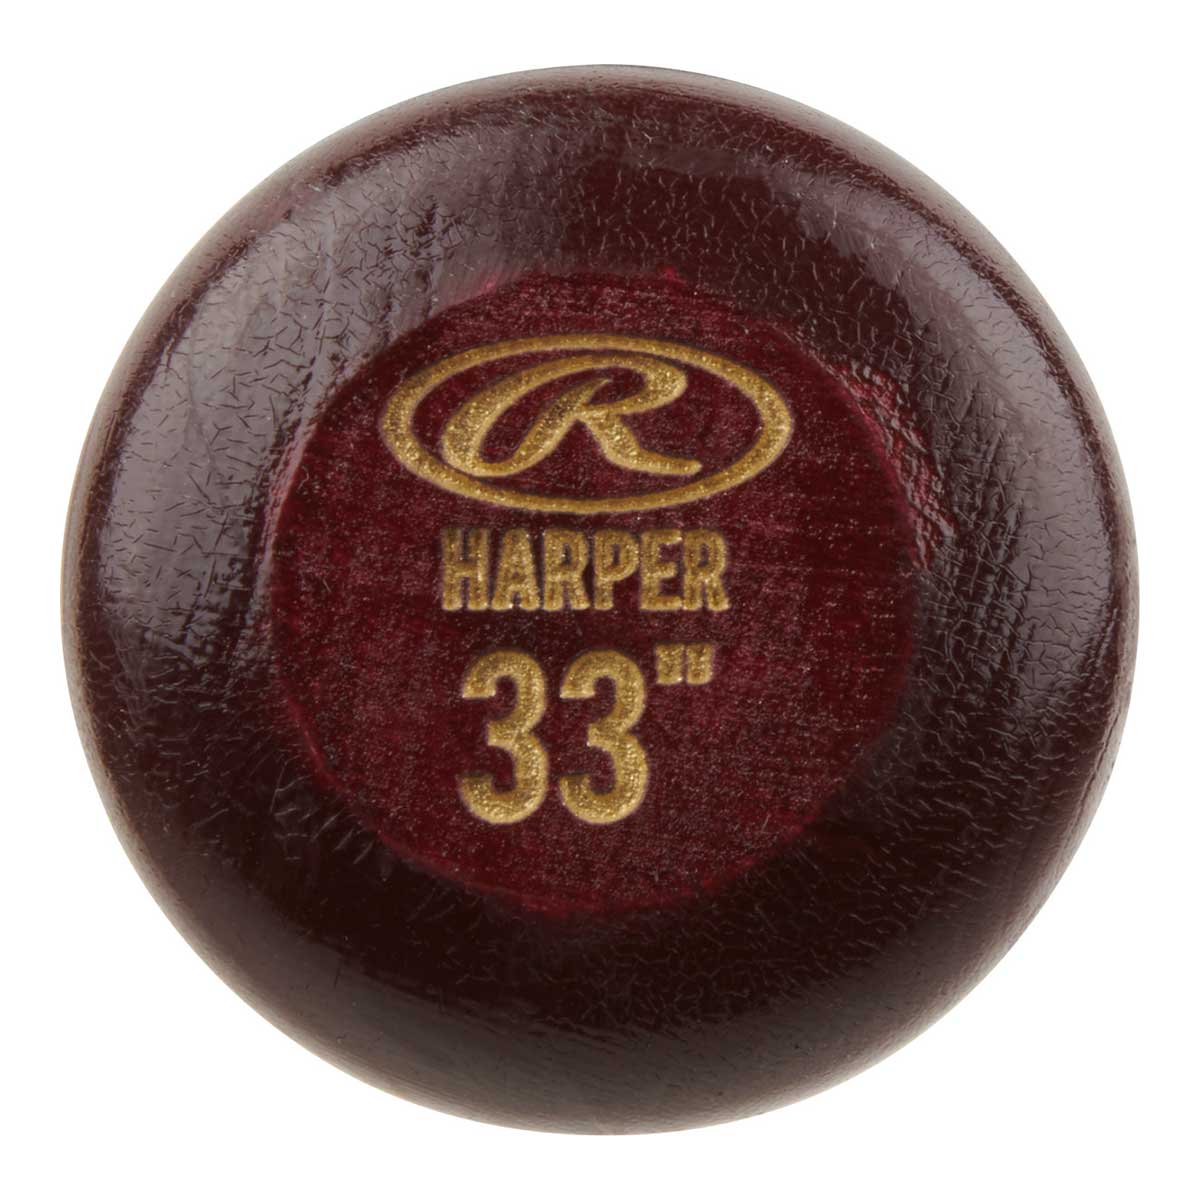 Rawlings Pro Label Series BH3 Gameday Bryce Harper Profile BH3PL